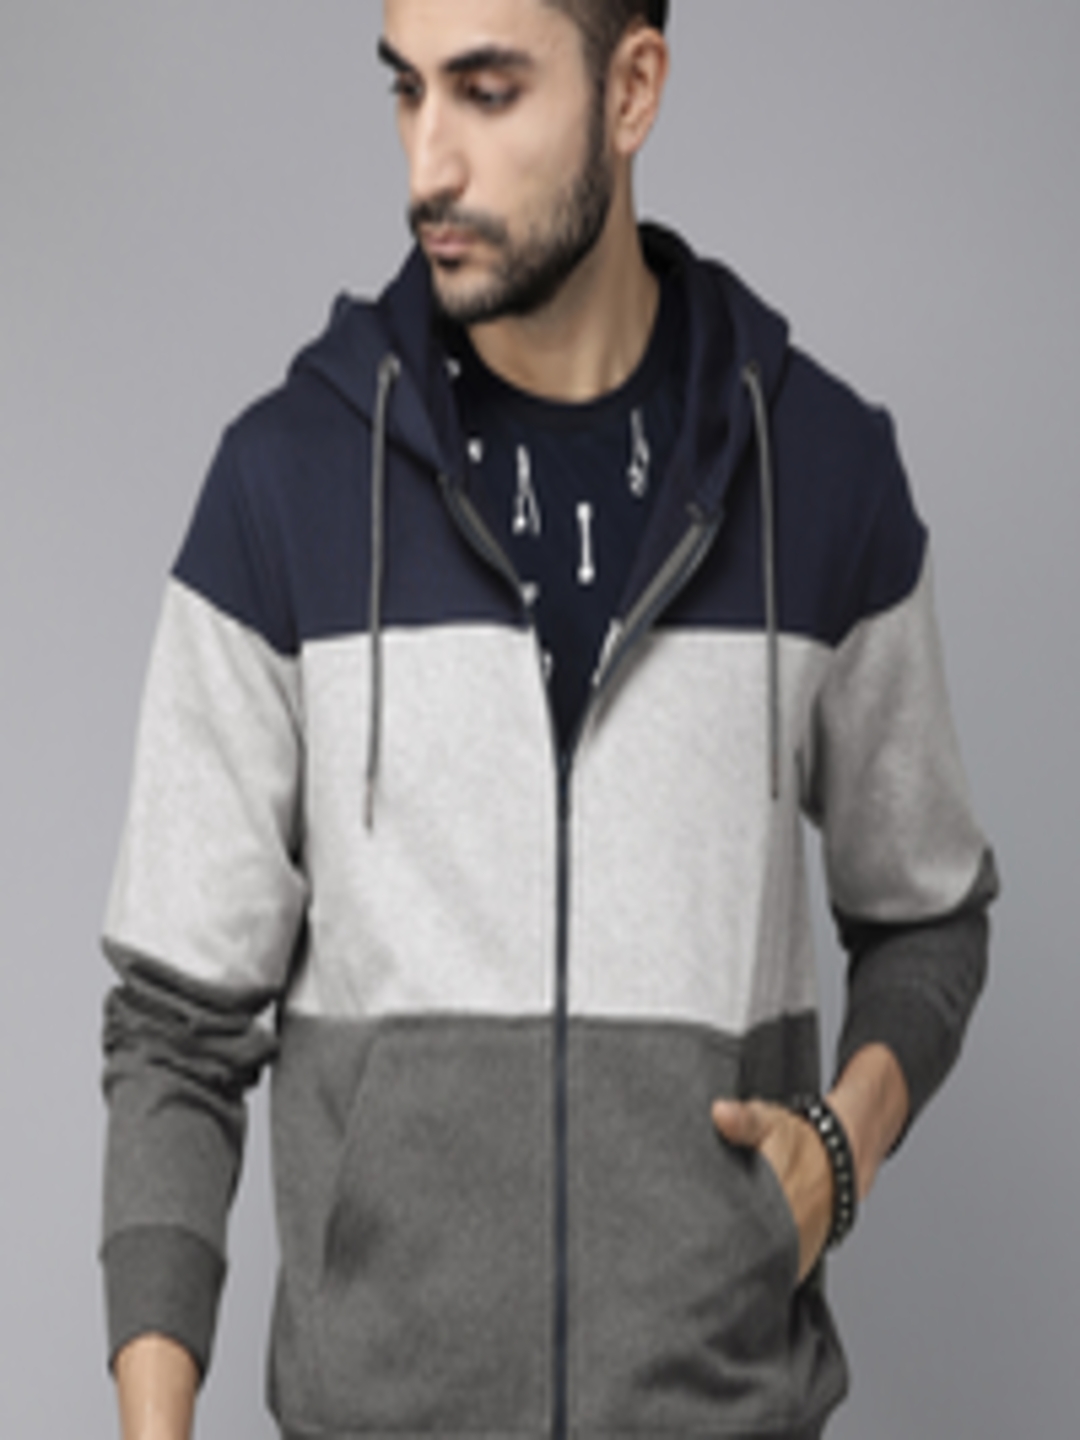 Buy The Roadster Lifestyle Co Men Navy Blue & Grey Colourblocked Hooded ...